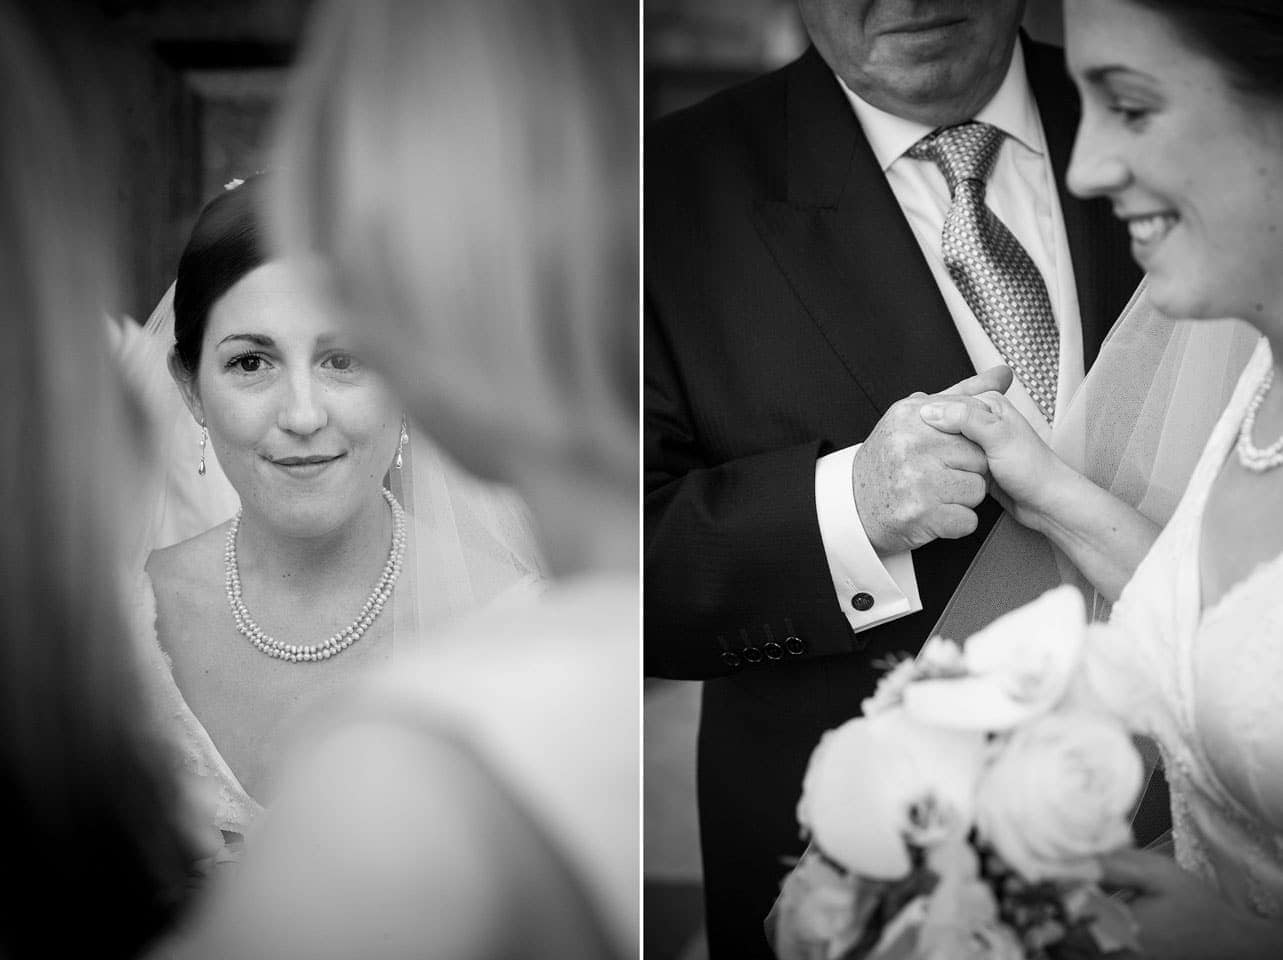 St Pauls Cathedral wedding photographer